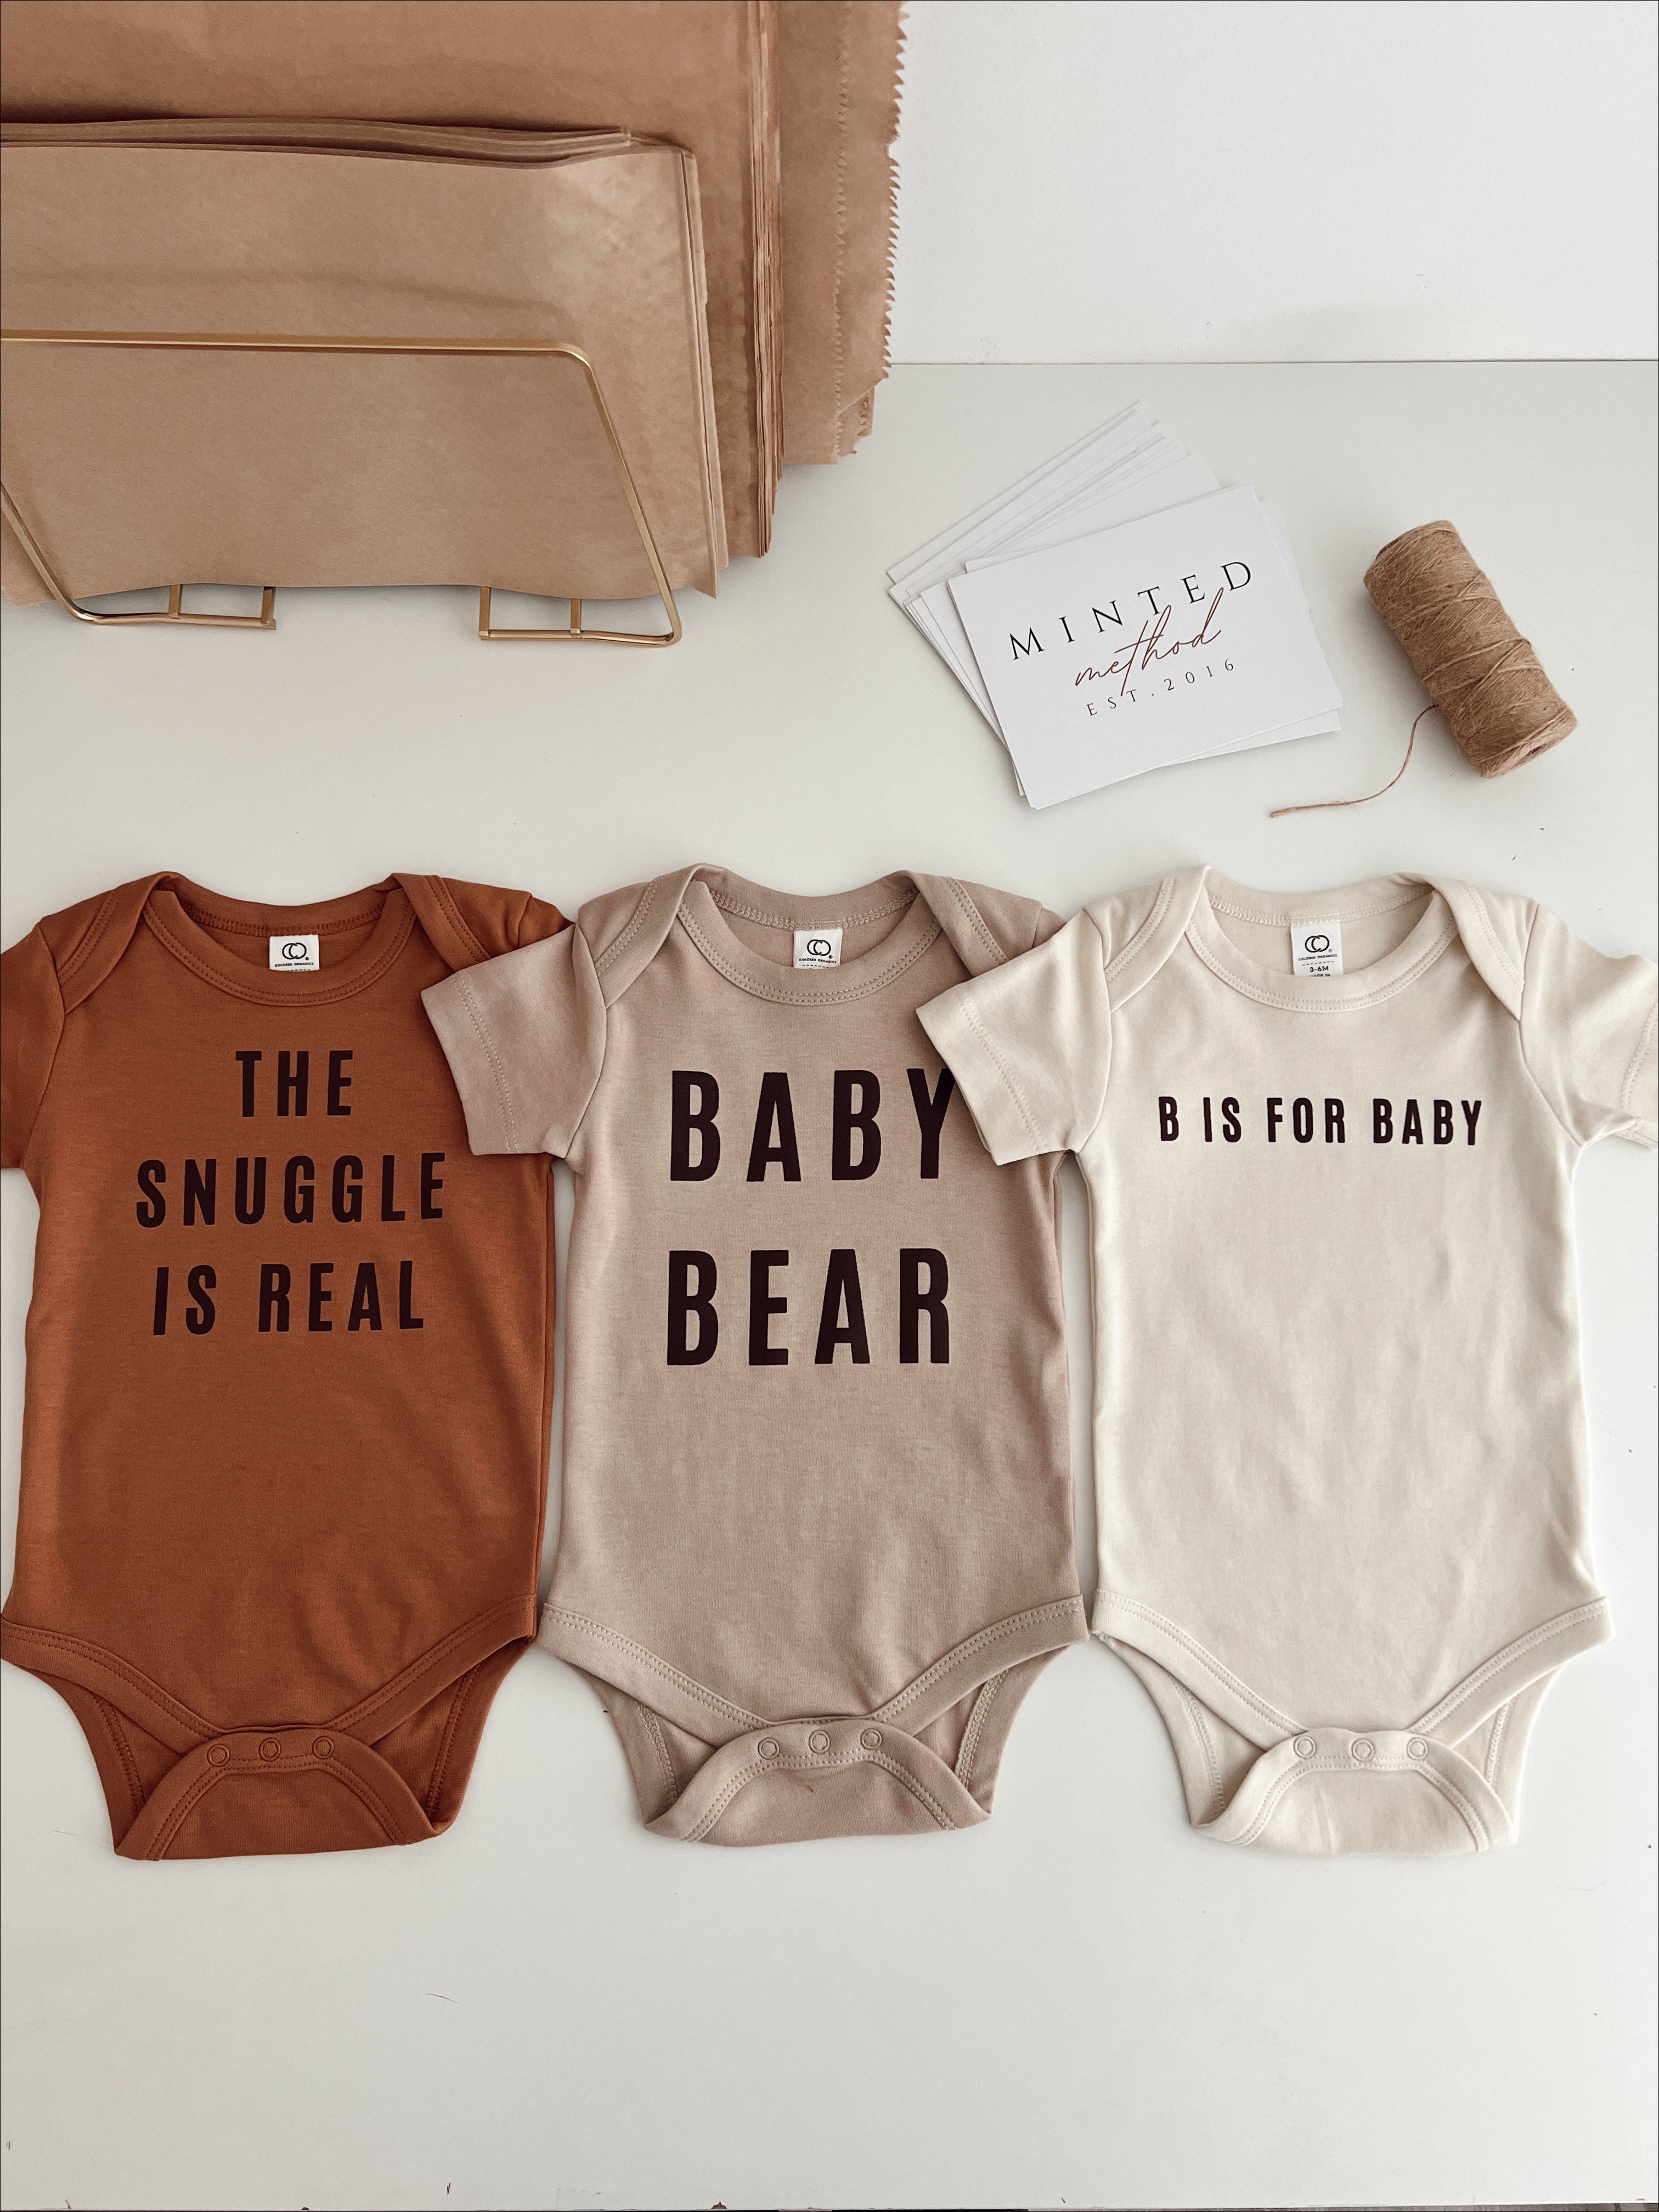 B is for Baby Organic Onesie